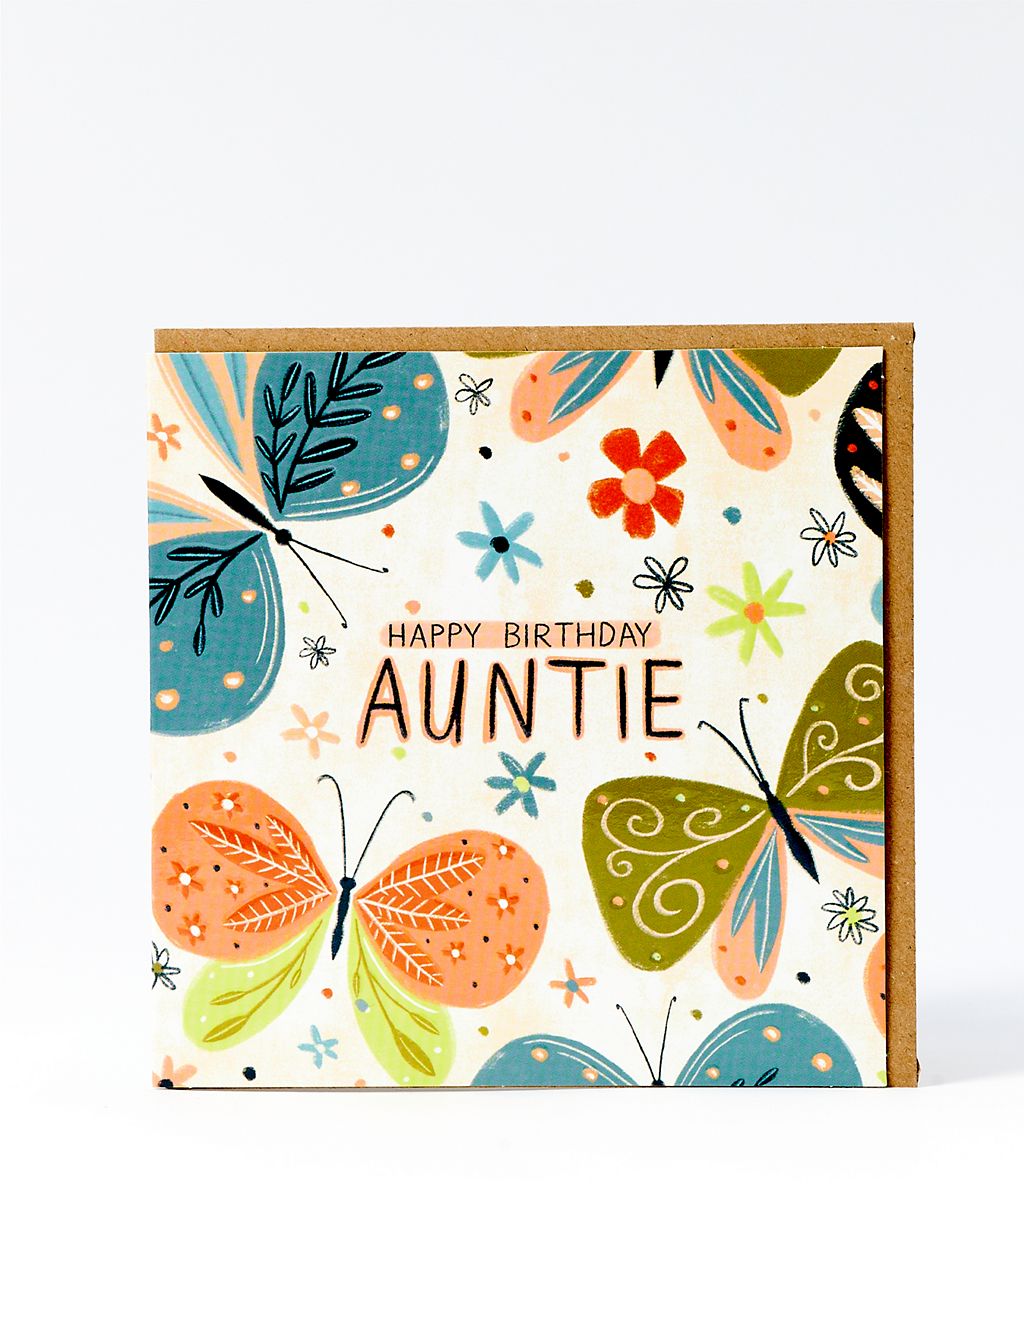 Contemporary Butterfly Birthday Card For Auntie 1 of 1